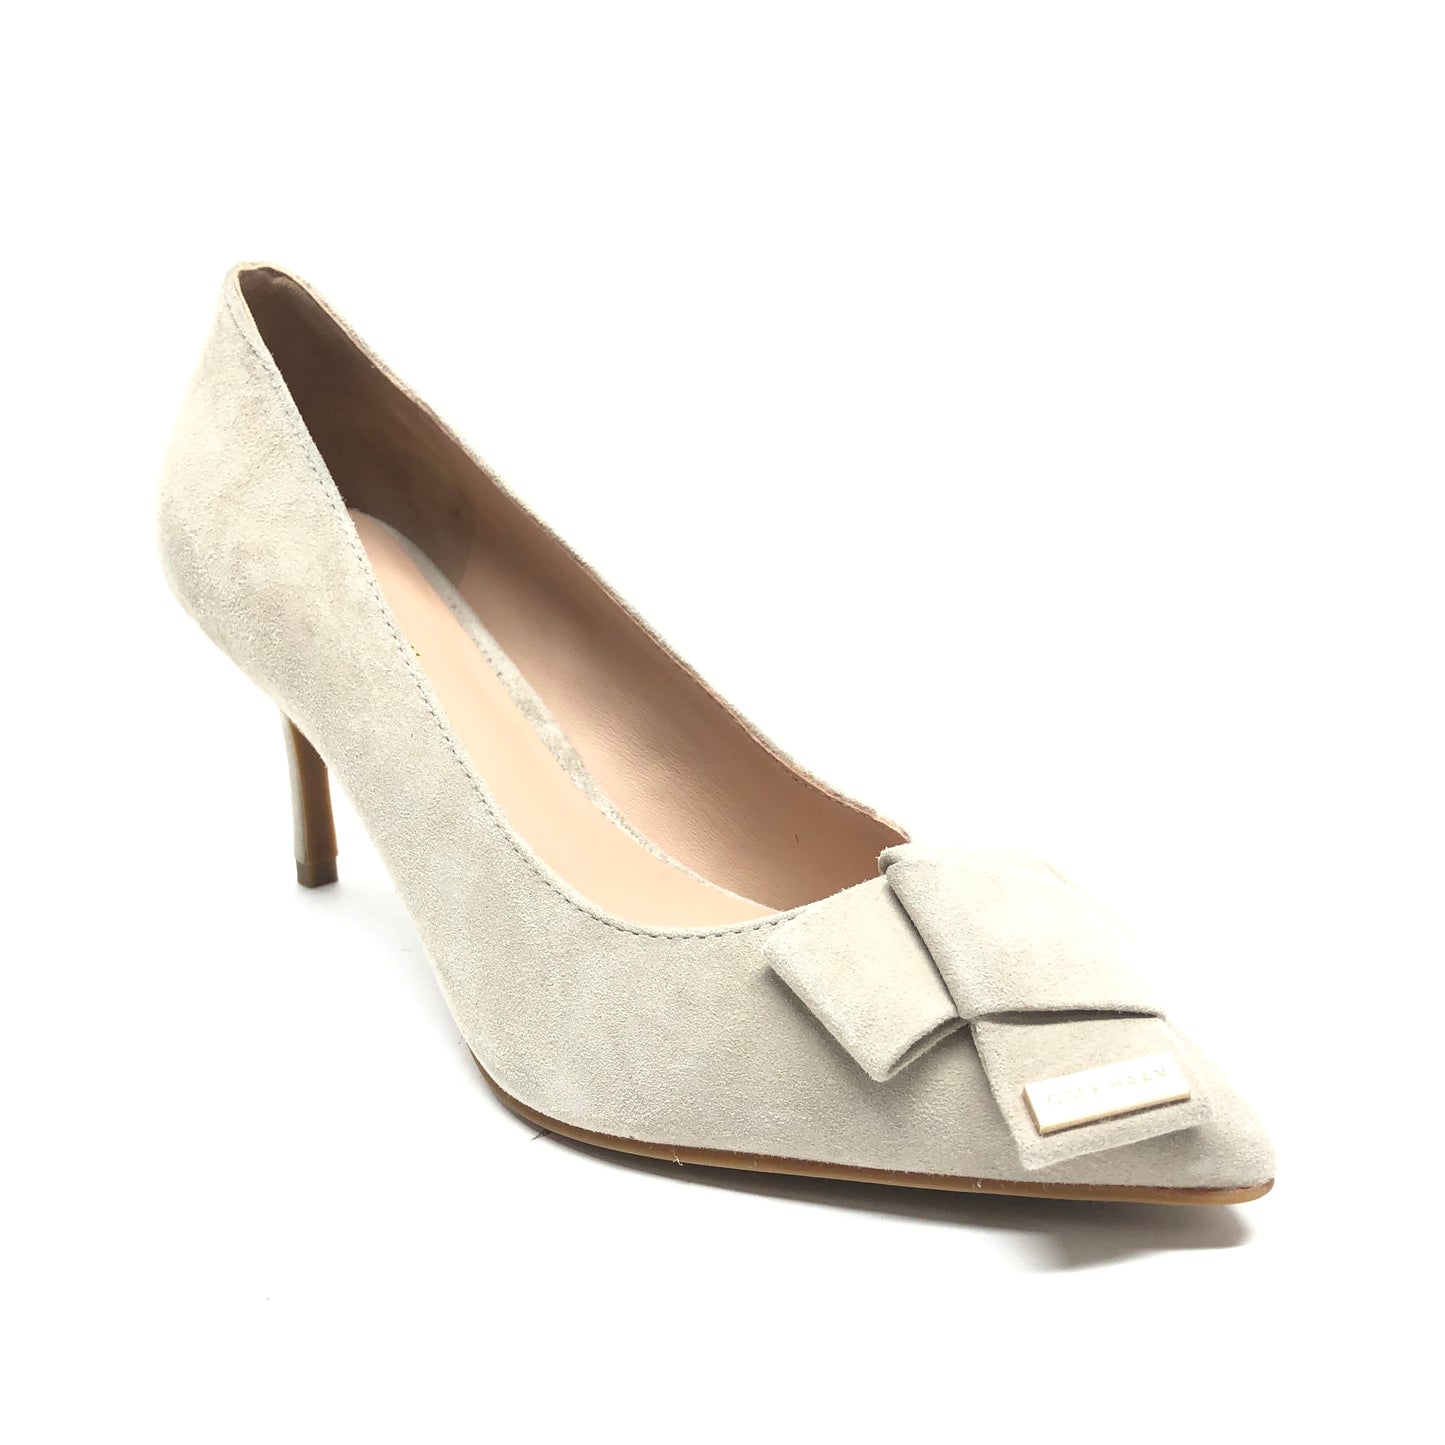 Shoes Heels Stiletto By Cole-haan  Size: 6.5